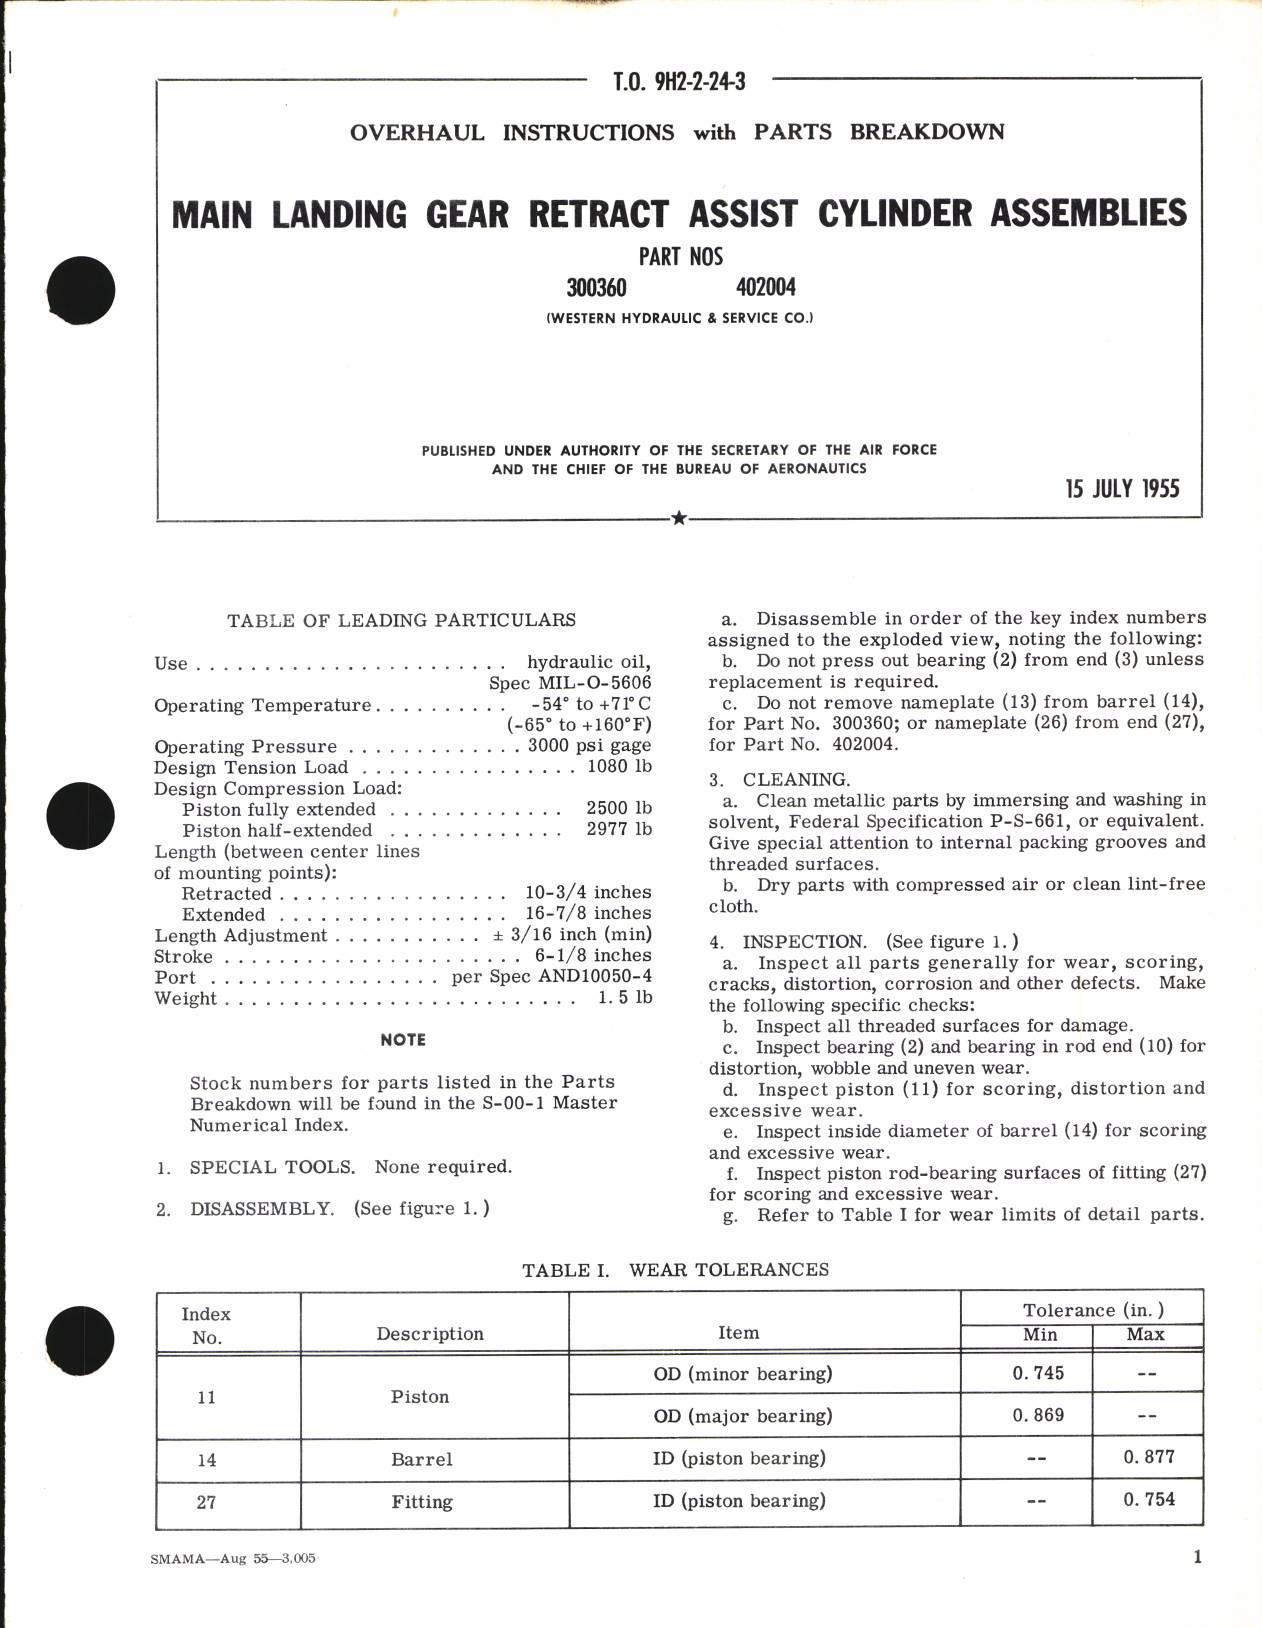 Sample page 1 from AirCorps Library document: Overhaul Instructions with Parts Breakdown for Main Landing Gear Retract assist Cylinder Assemblies